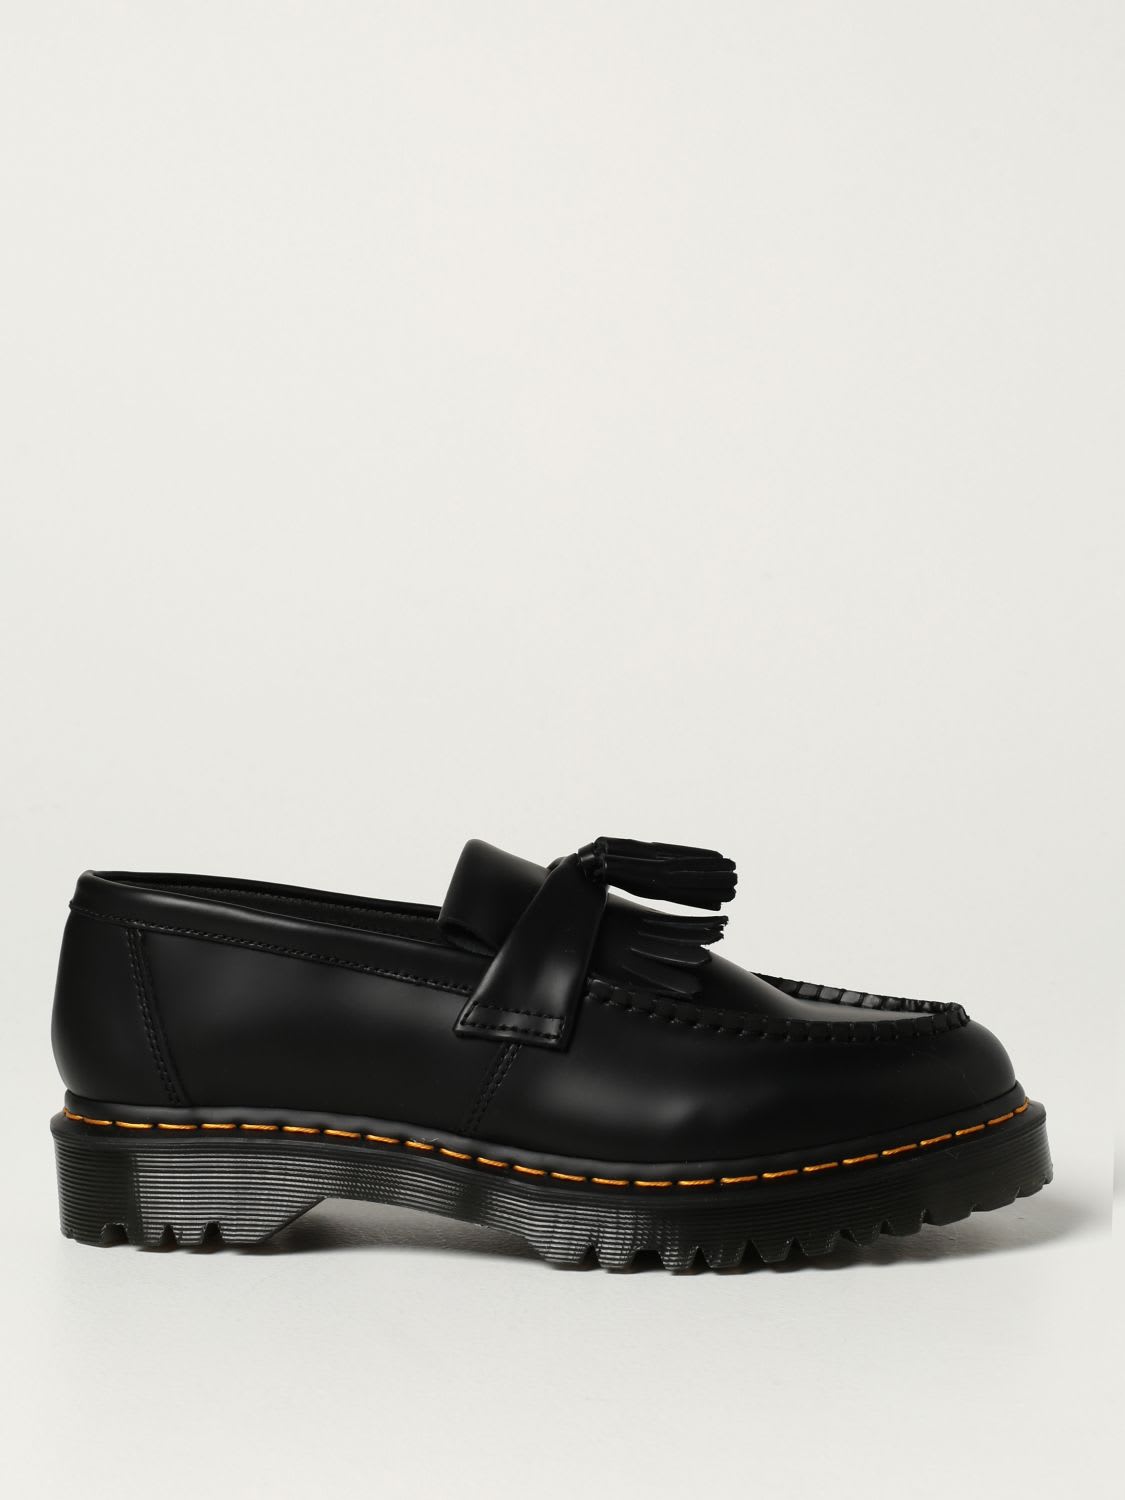 Dr. Martens Loafers Adrian Bex Dr. Martens Moccasin In Smooth Leather